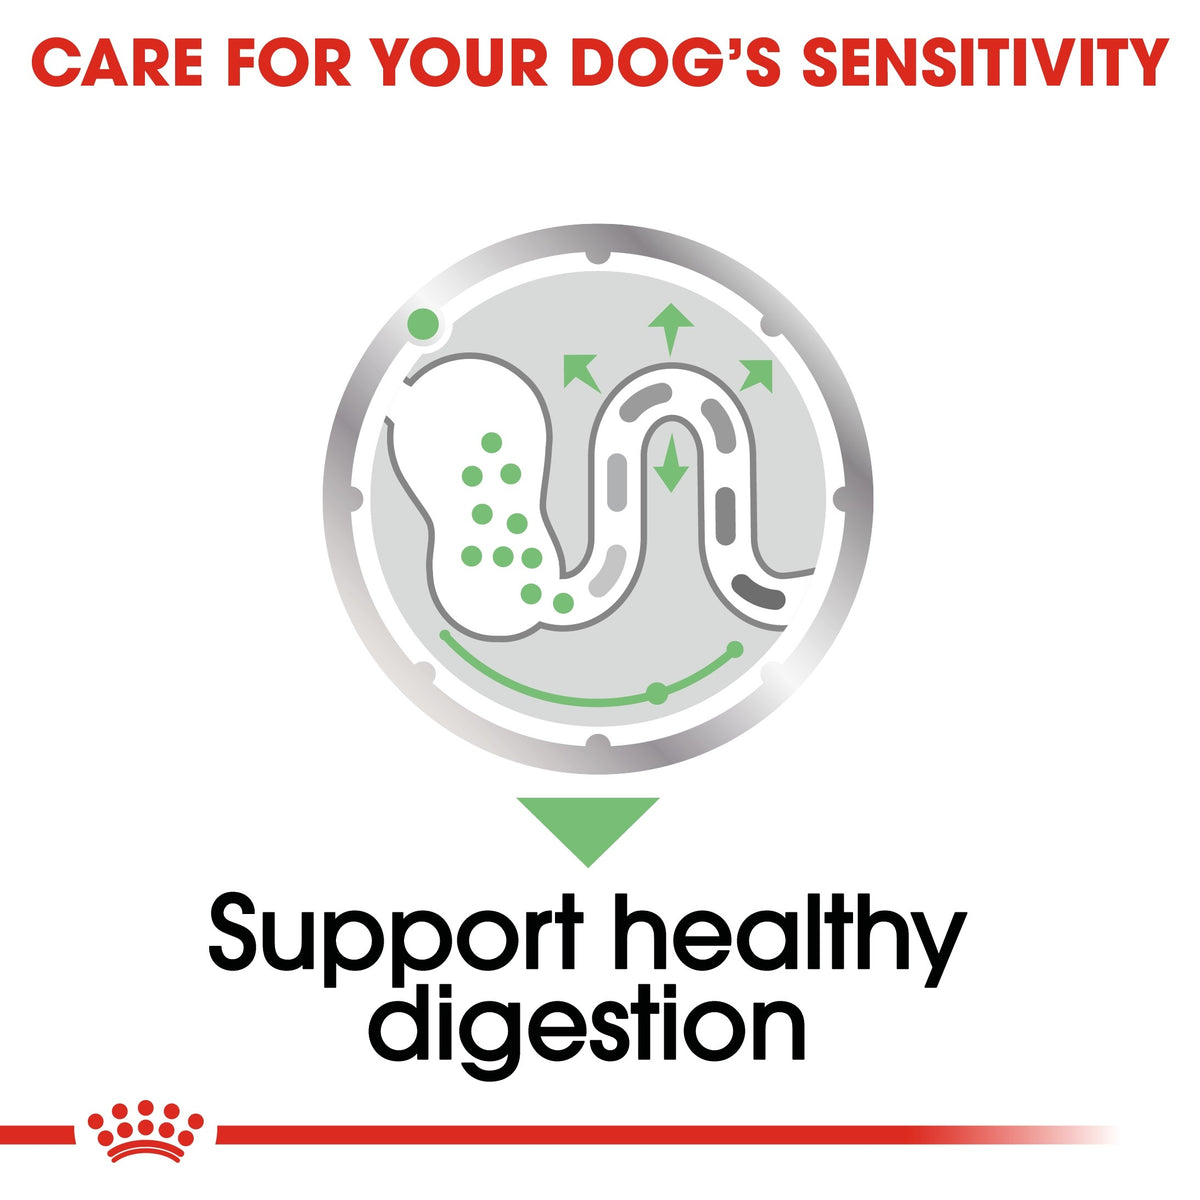 CANINE CARE NUTRITION DIGESTIVE CARE (WET FOOD) - POUCH